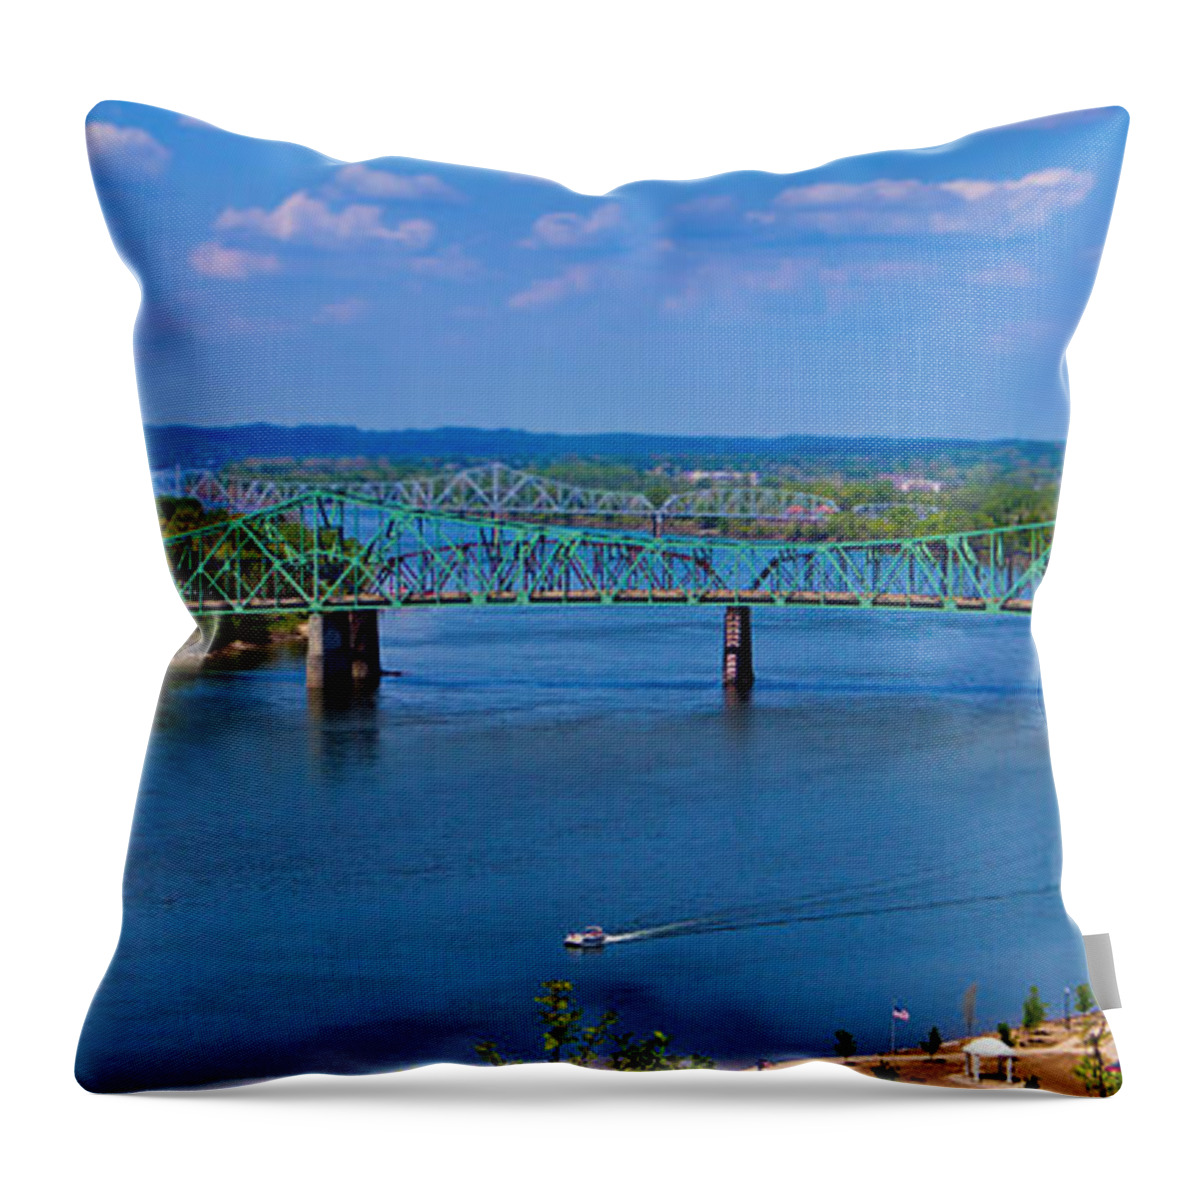 Movid Studios Throw Pillow featuring the photograph Bridge on the Ohio River by Jonny D